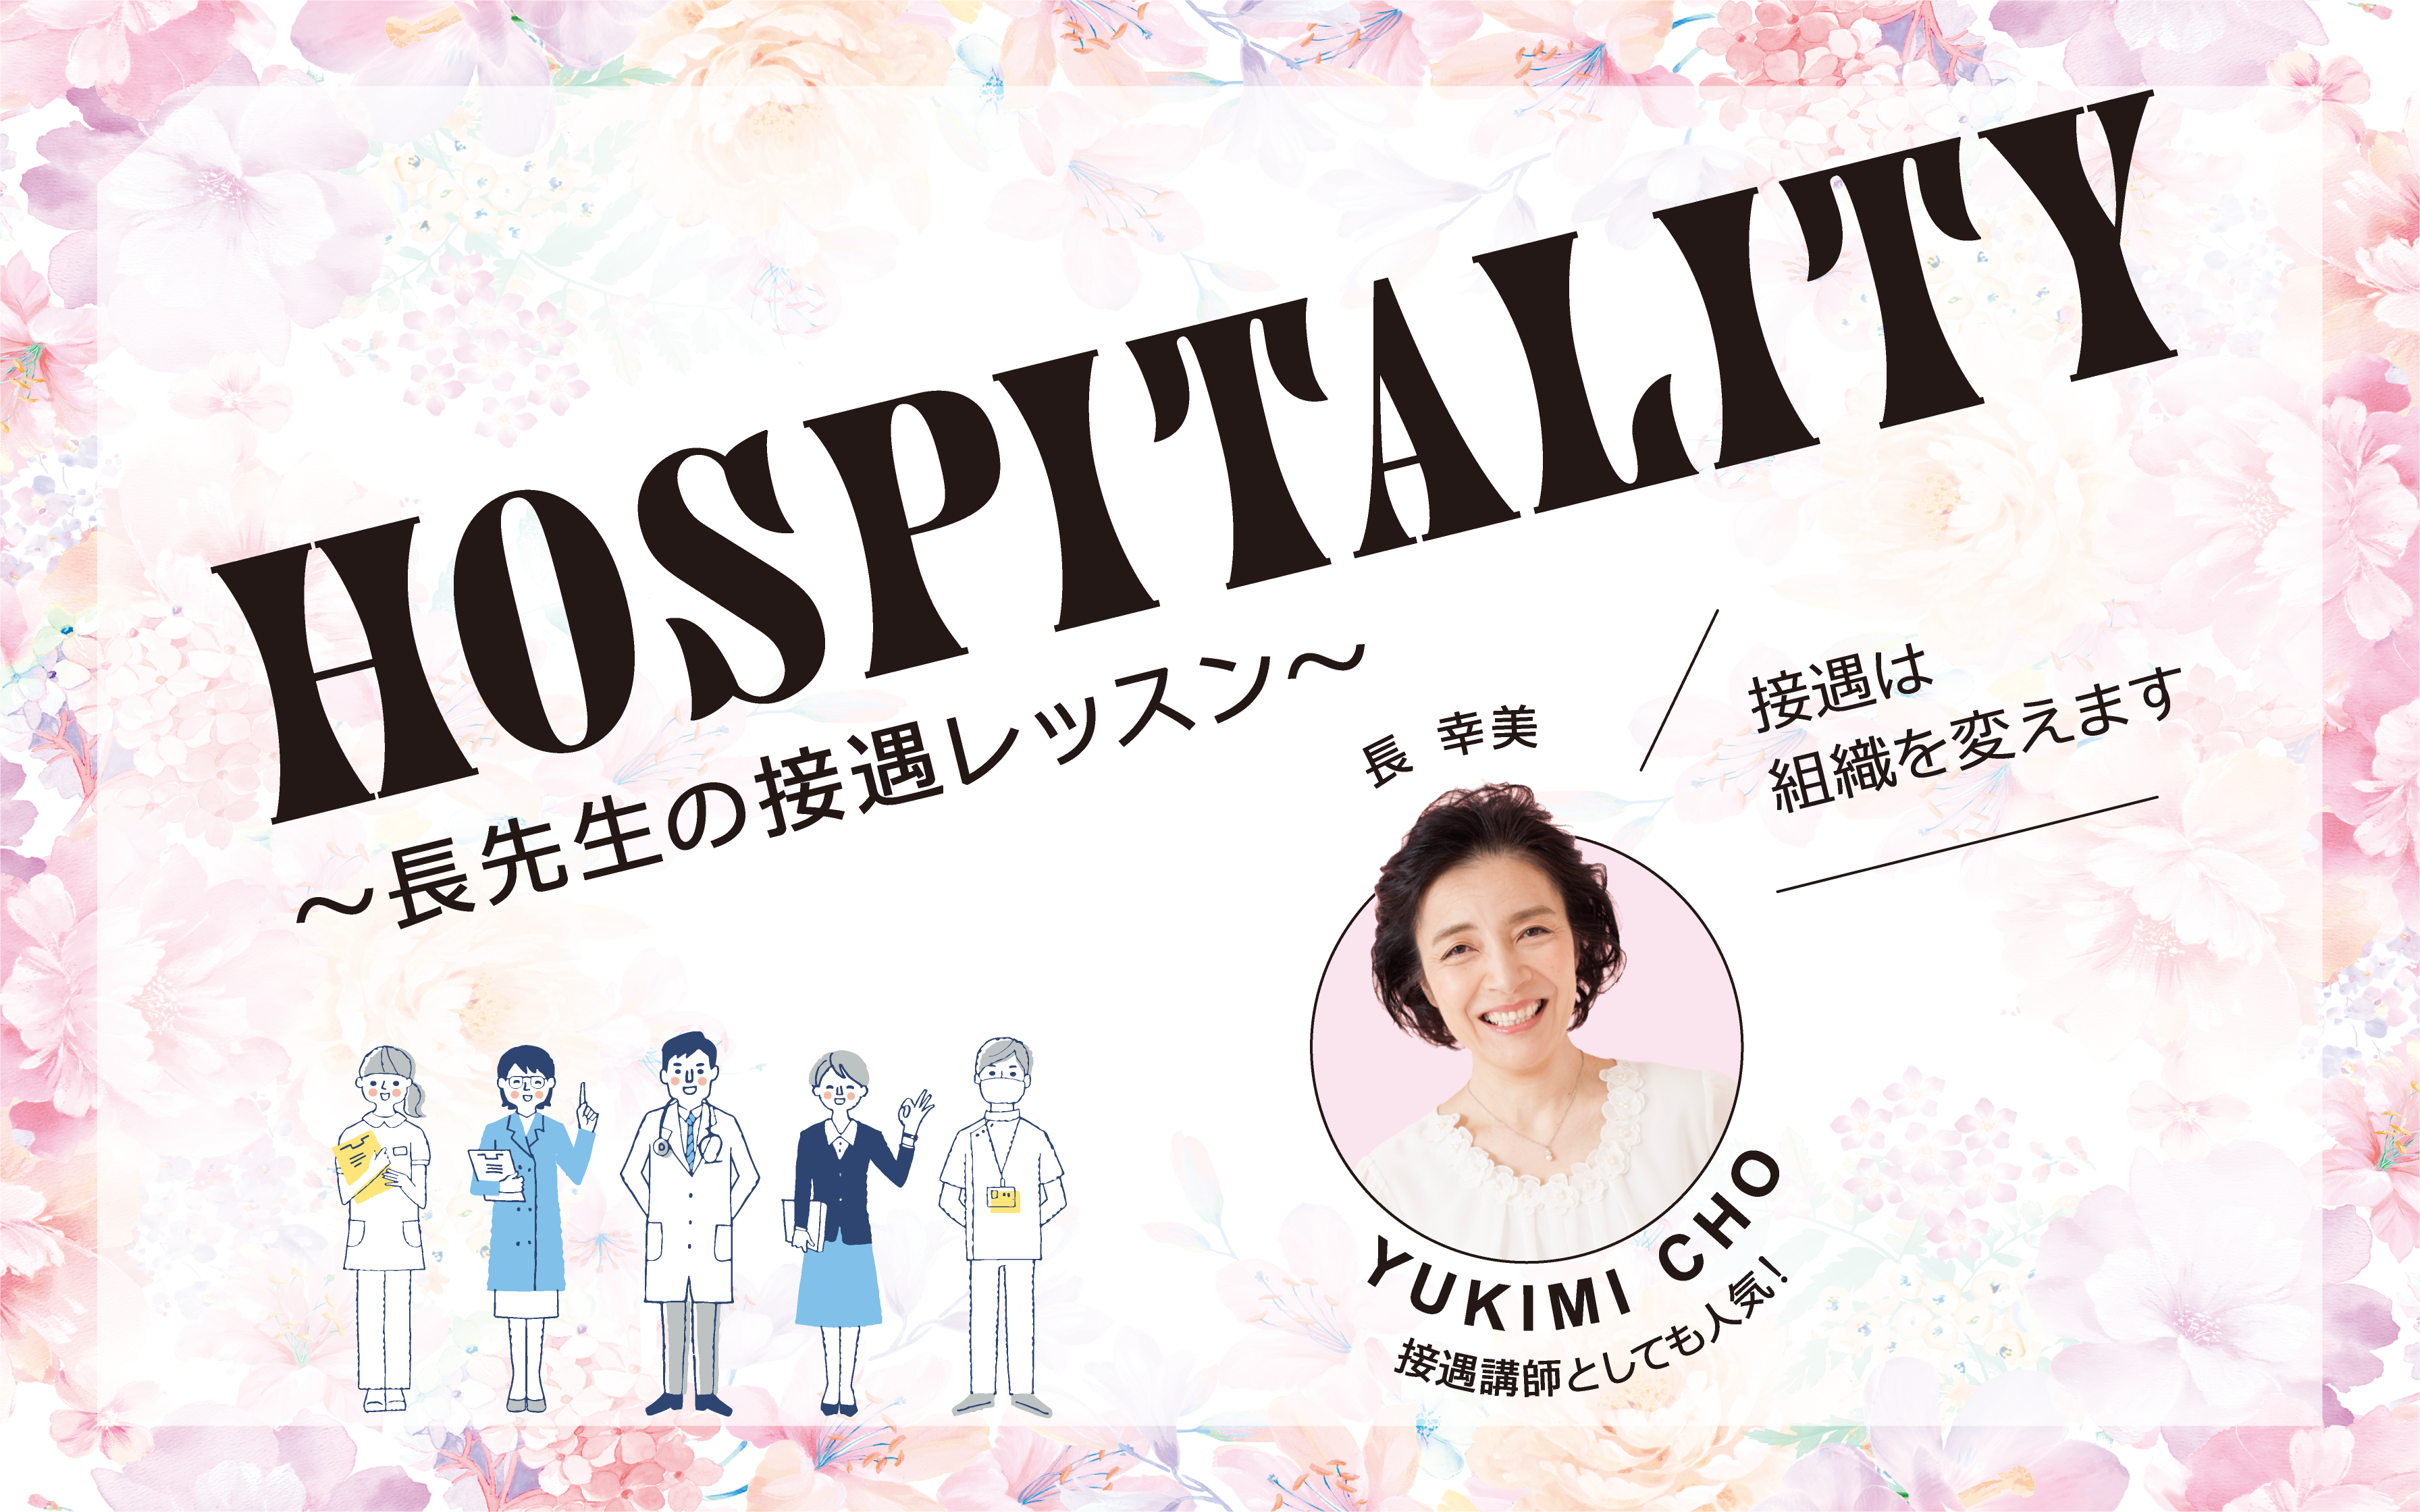 You are currently viewing HOSPITALITY 〜長先生の接遇レッスン〜 VOL.24　感染対策と接遇